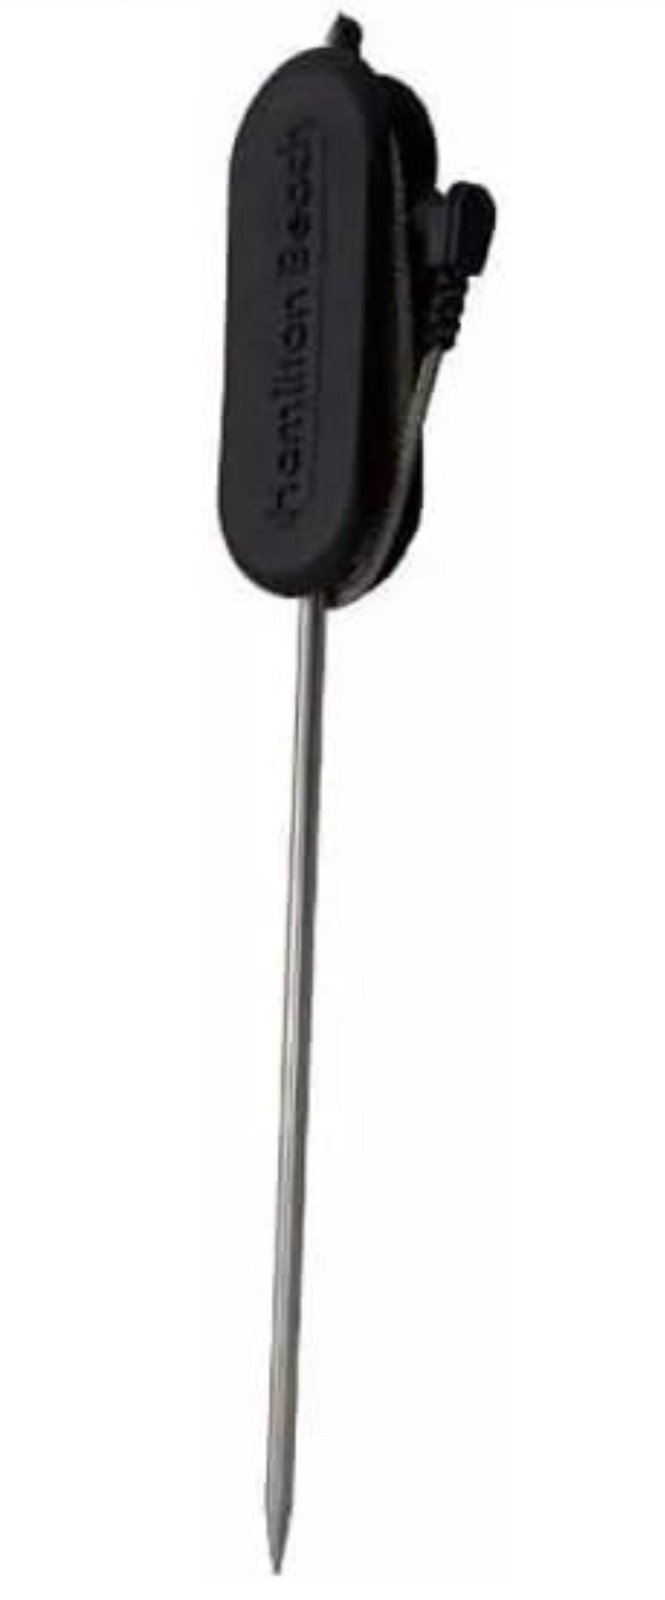 Slow Cooker Temperature Probe 490601708 Compatible with All Hamilton Beach slow c8rQNEliV